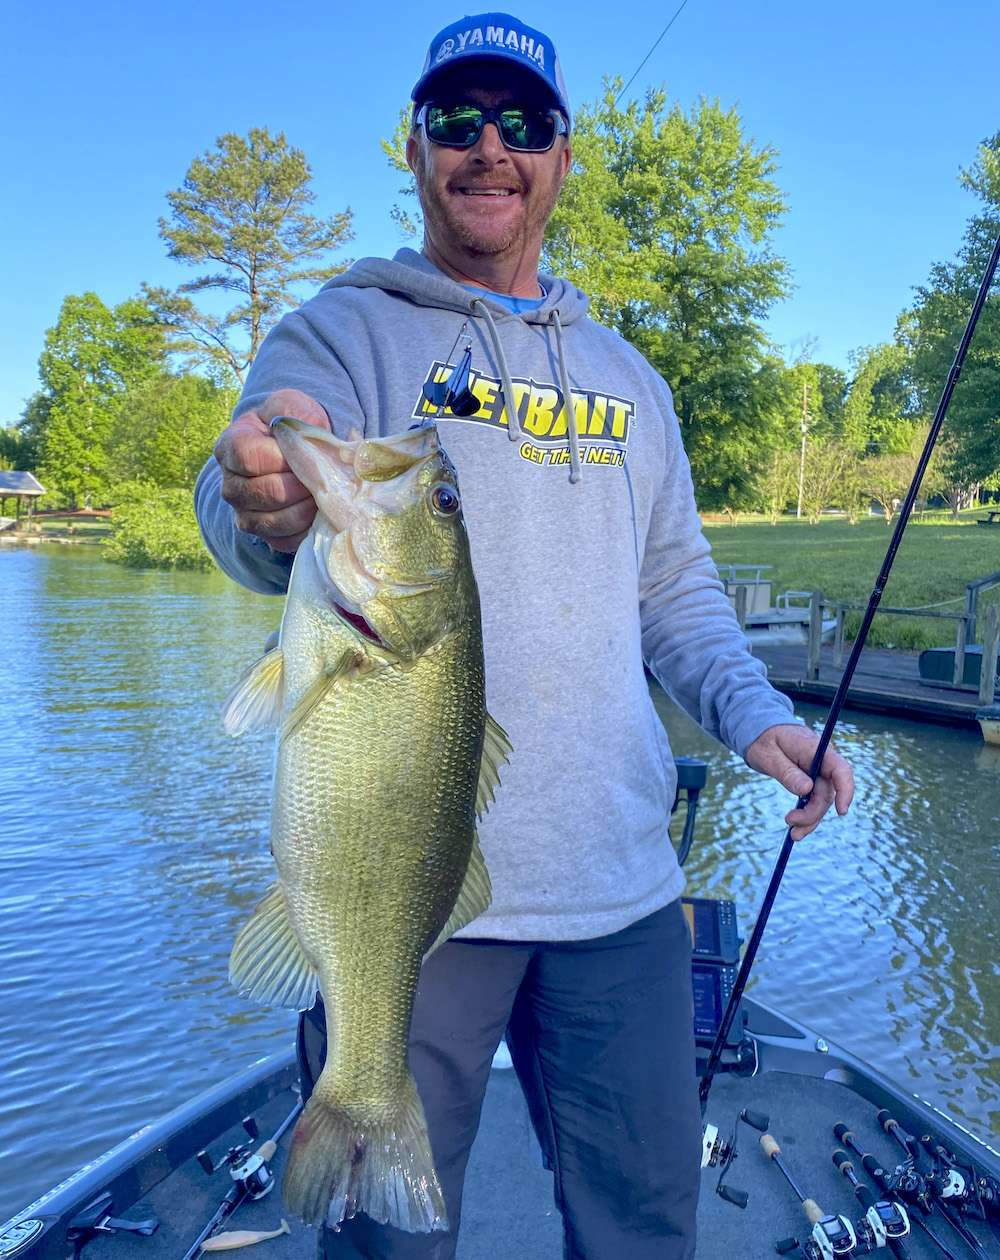 <b>7:41 a.m.</b> Canterbury moves to the back of a canal and gets a massive strike on the buzzbait! His third keeper weighs 5 pounds, 12 ounces. âMan, that was awesome! Nothingâs more exciting than catching âem on a buzzbait, but youâve got to know when to put it down âcause theyâll turn off it in a heartbeat.â
<BR><BR>
<B>6 HOURS LEFT</B><BR>â¨<b>7:45 a.m.</b> Canterbury moves quickly out of the canal while casting the buzzer.
